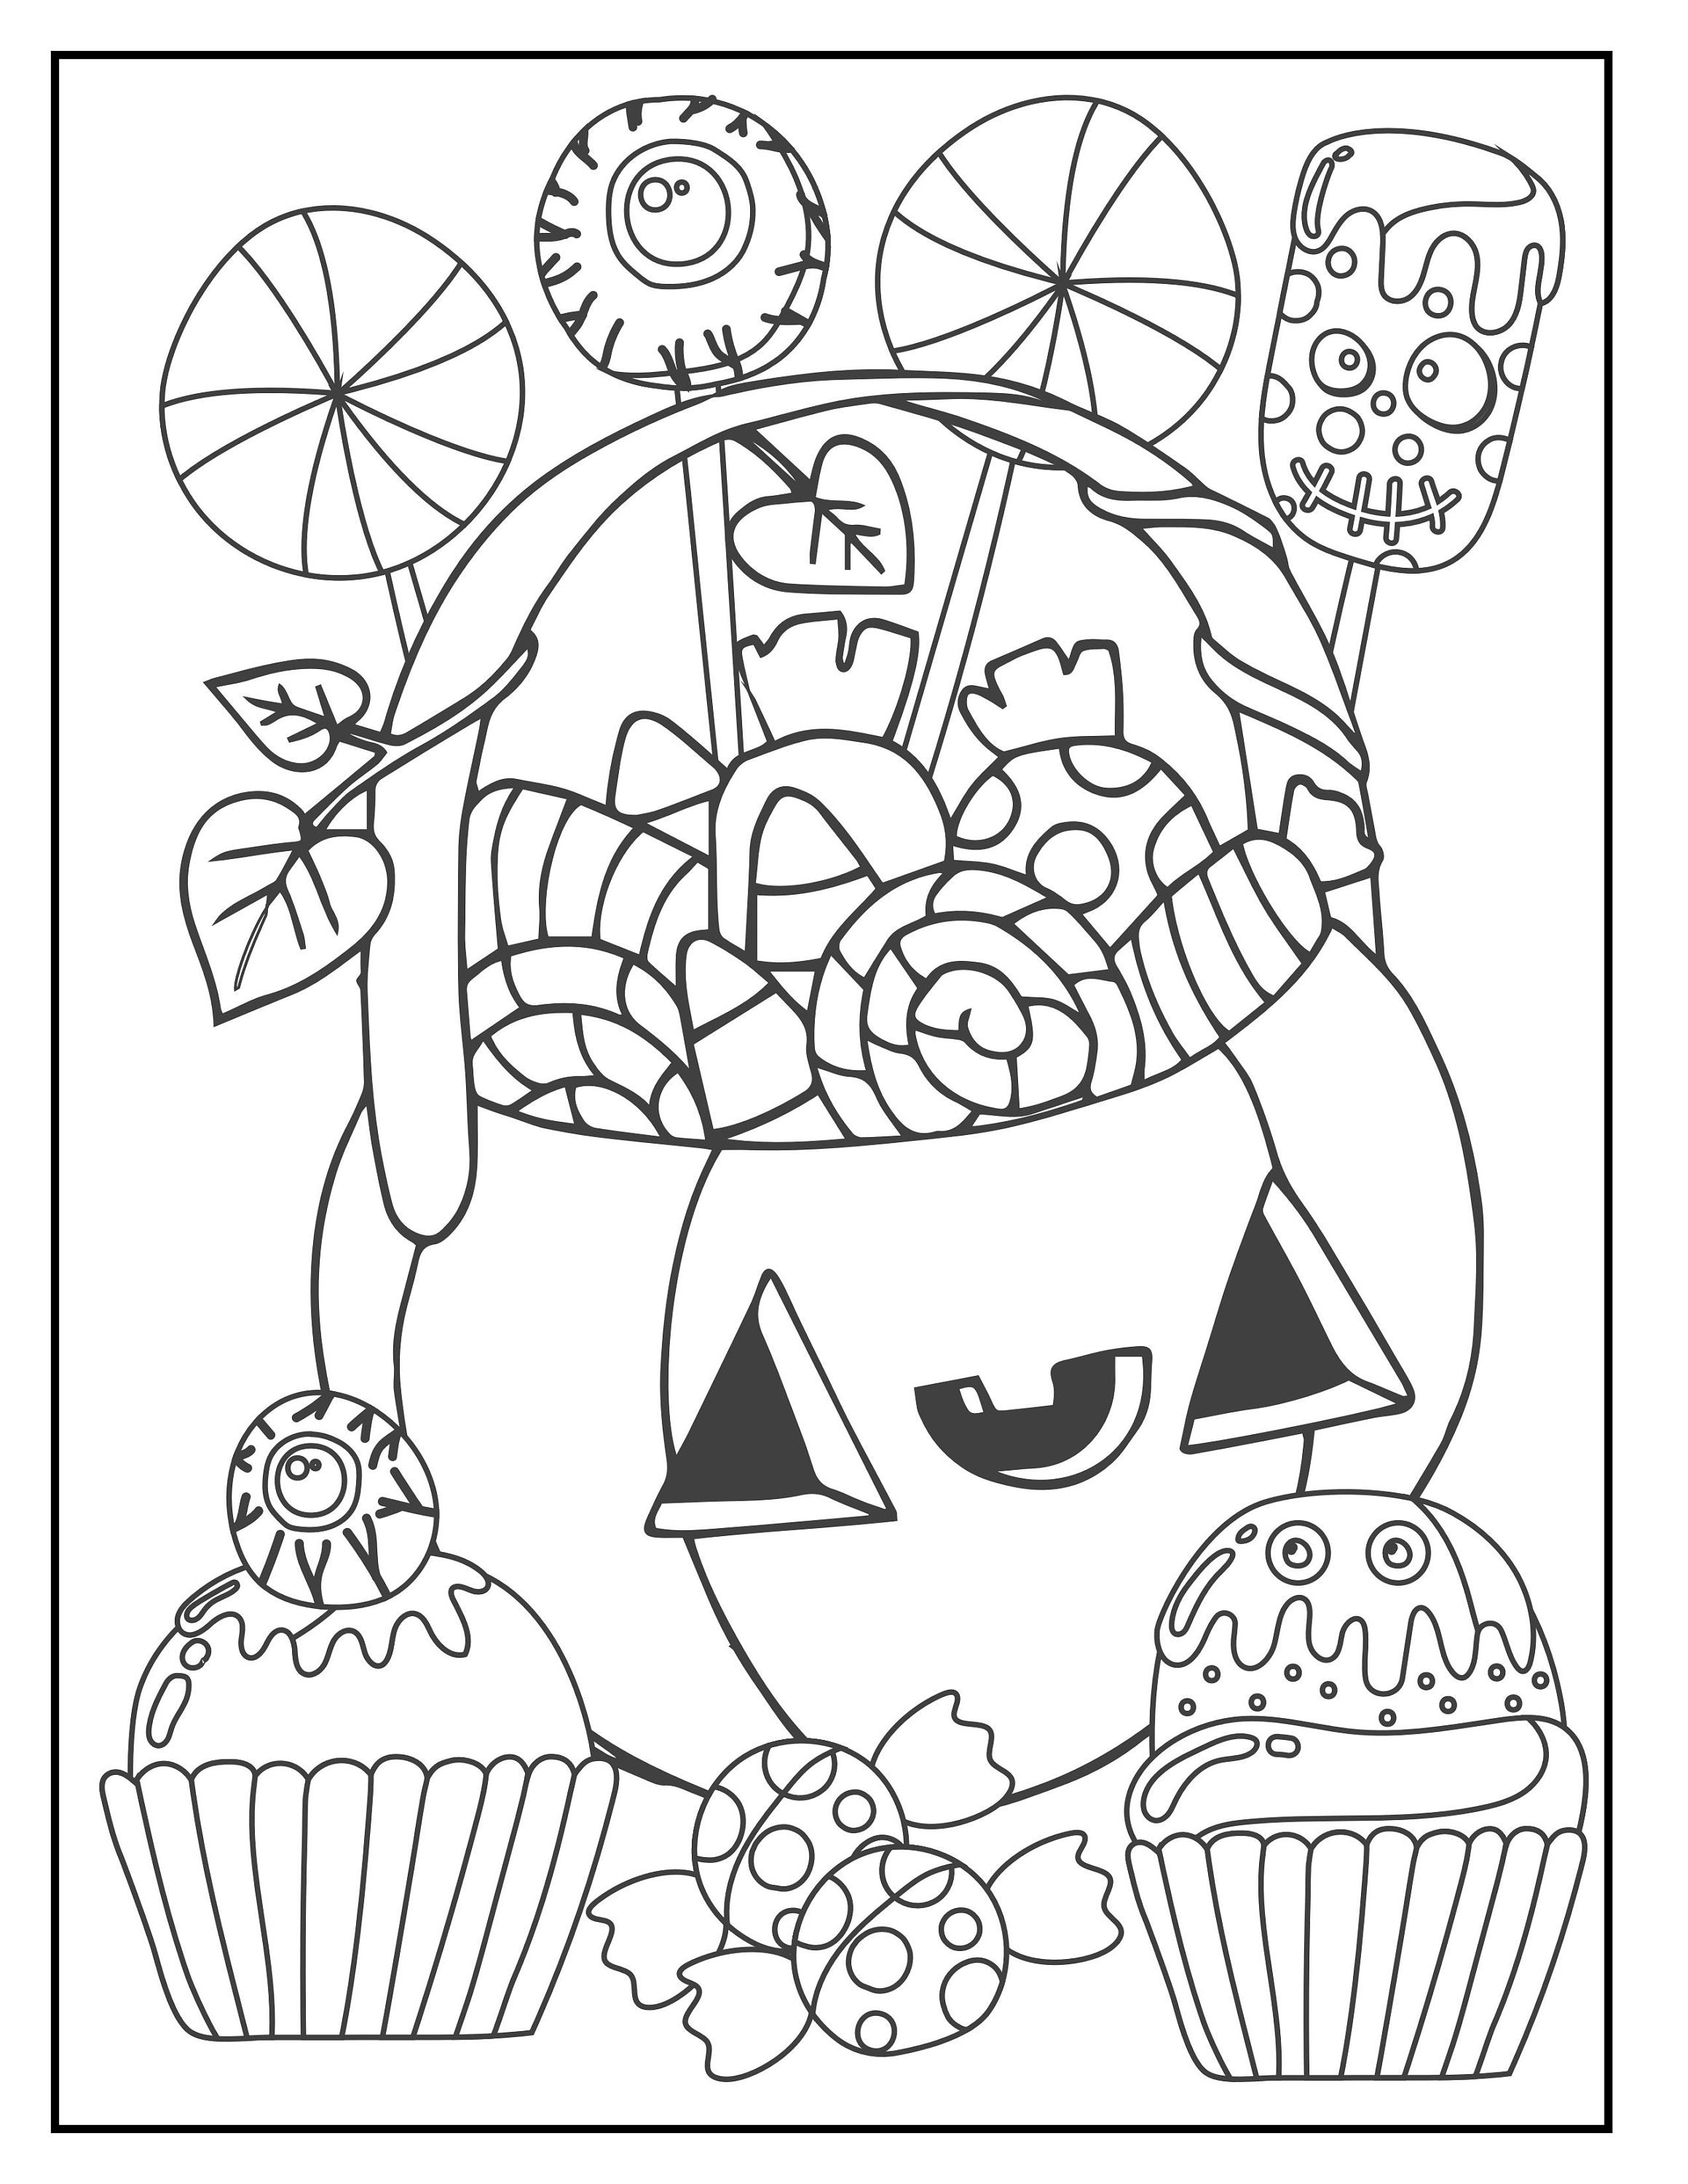 Candy Dusks, A Full Of Love Halloween Story Book For Kids Ages 5-7,  American English: Teach To Give Story For Kids, Illustrated. A Drawing Book  For A Child, Coloring Book. by Sarah